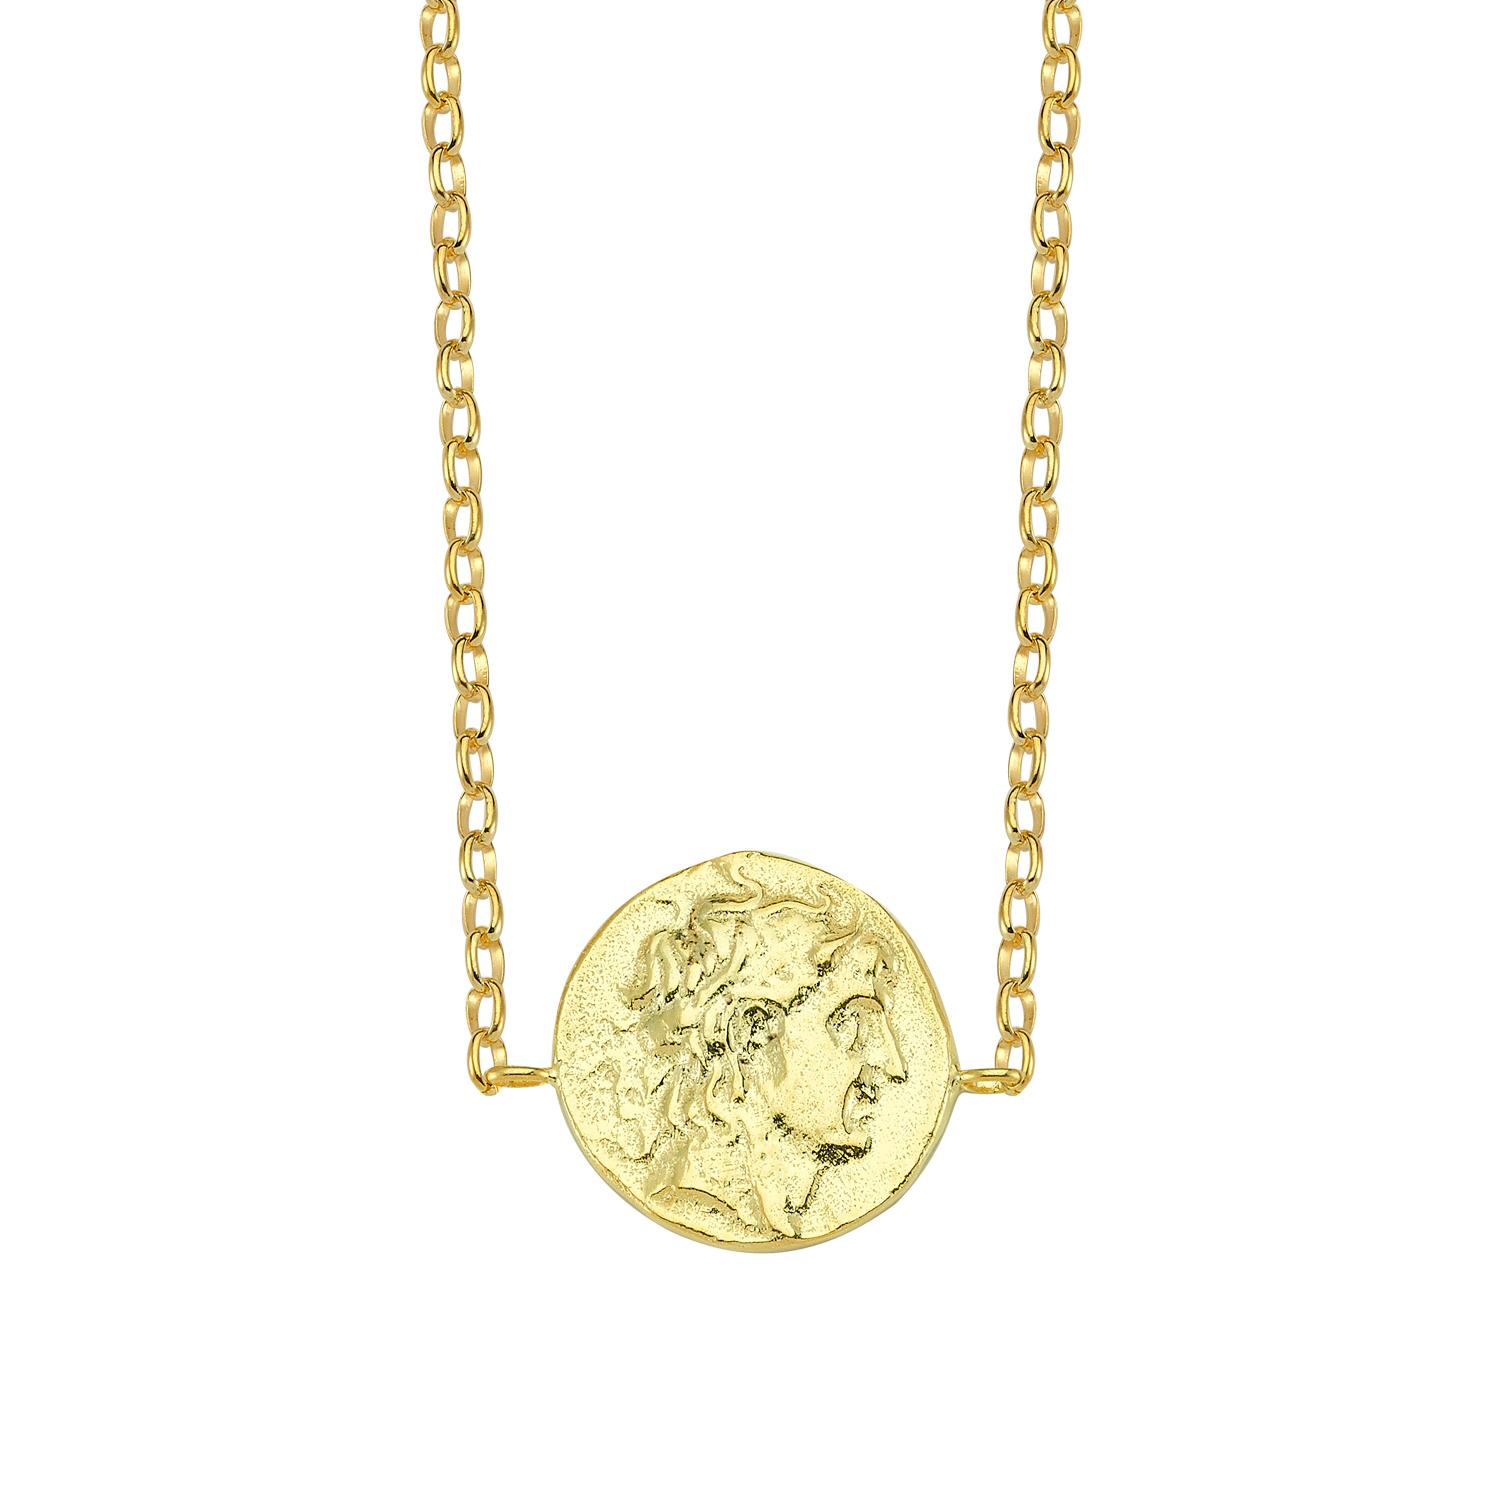 Reversible Roman Coin Choker necklace The Sis Kiss